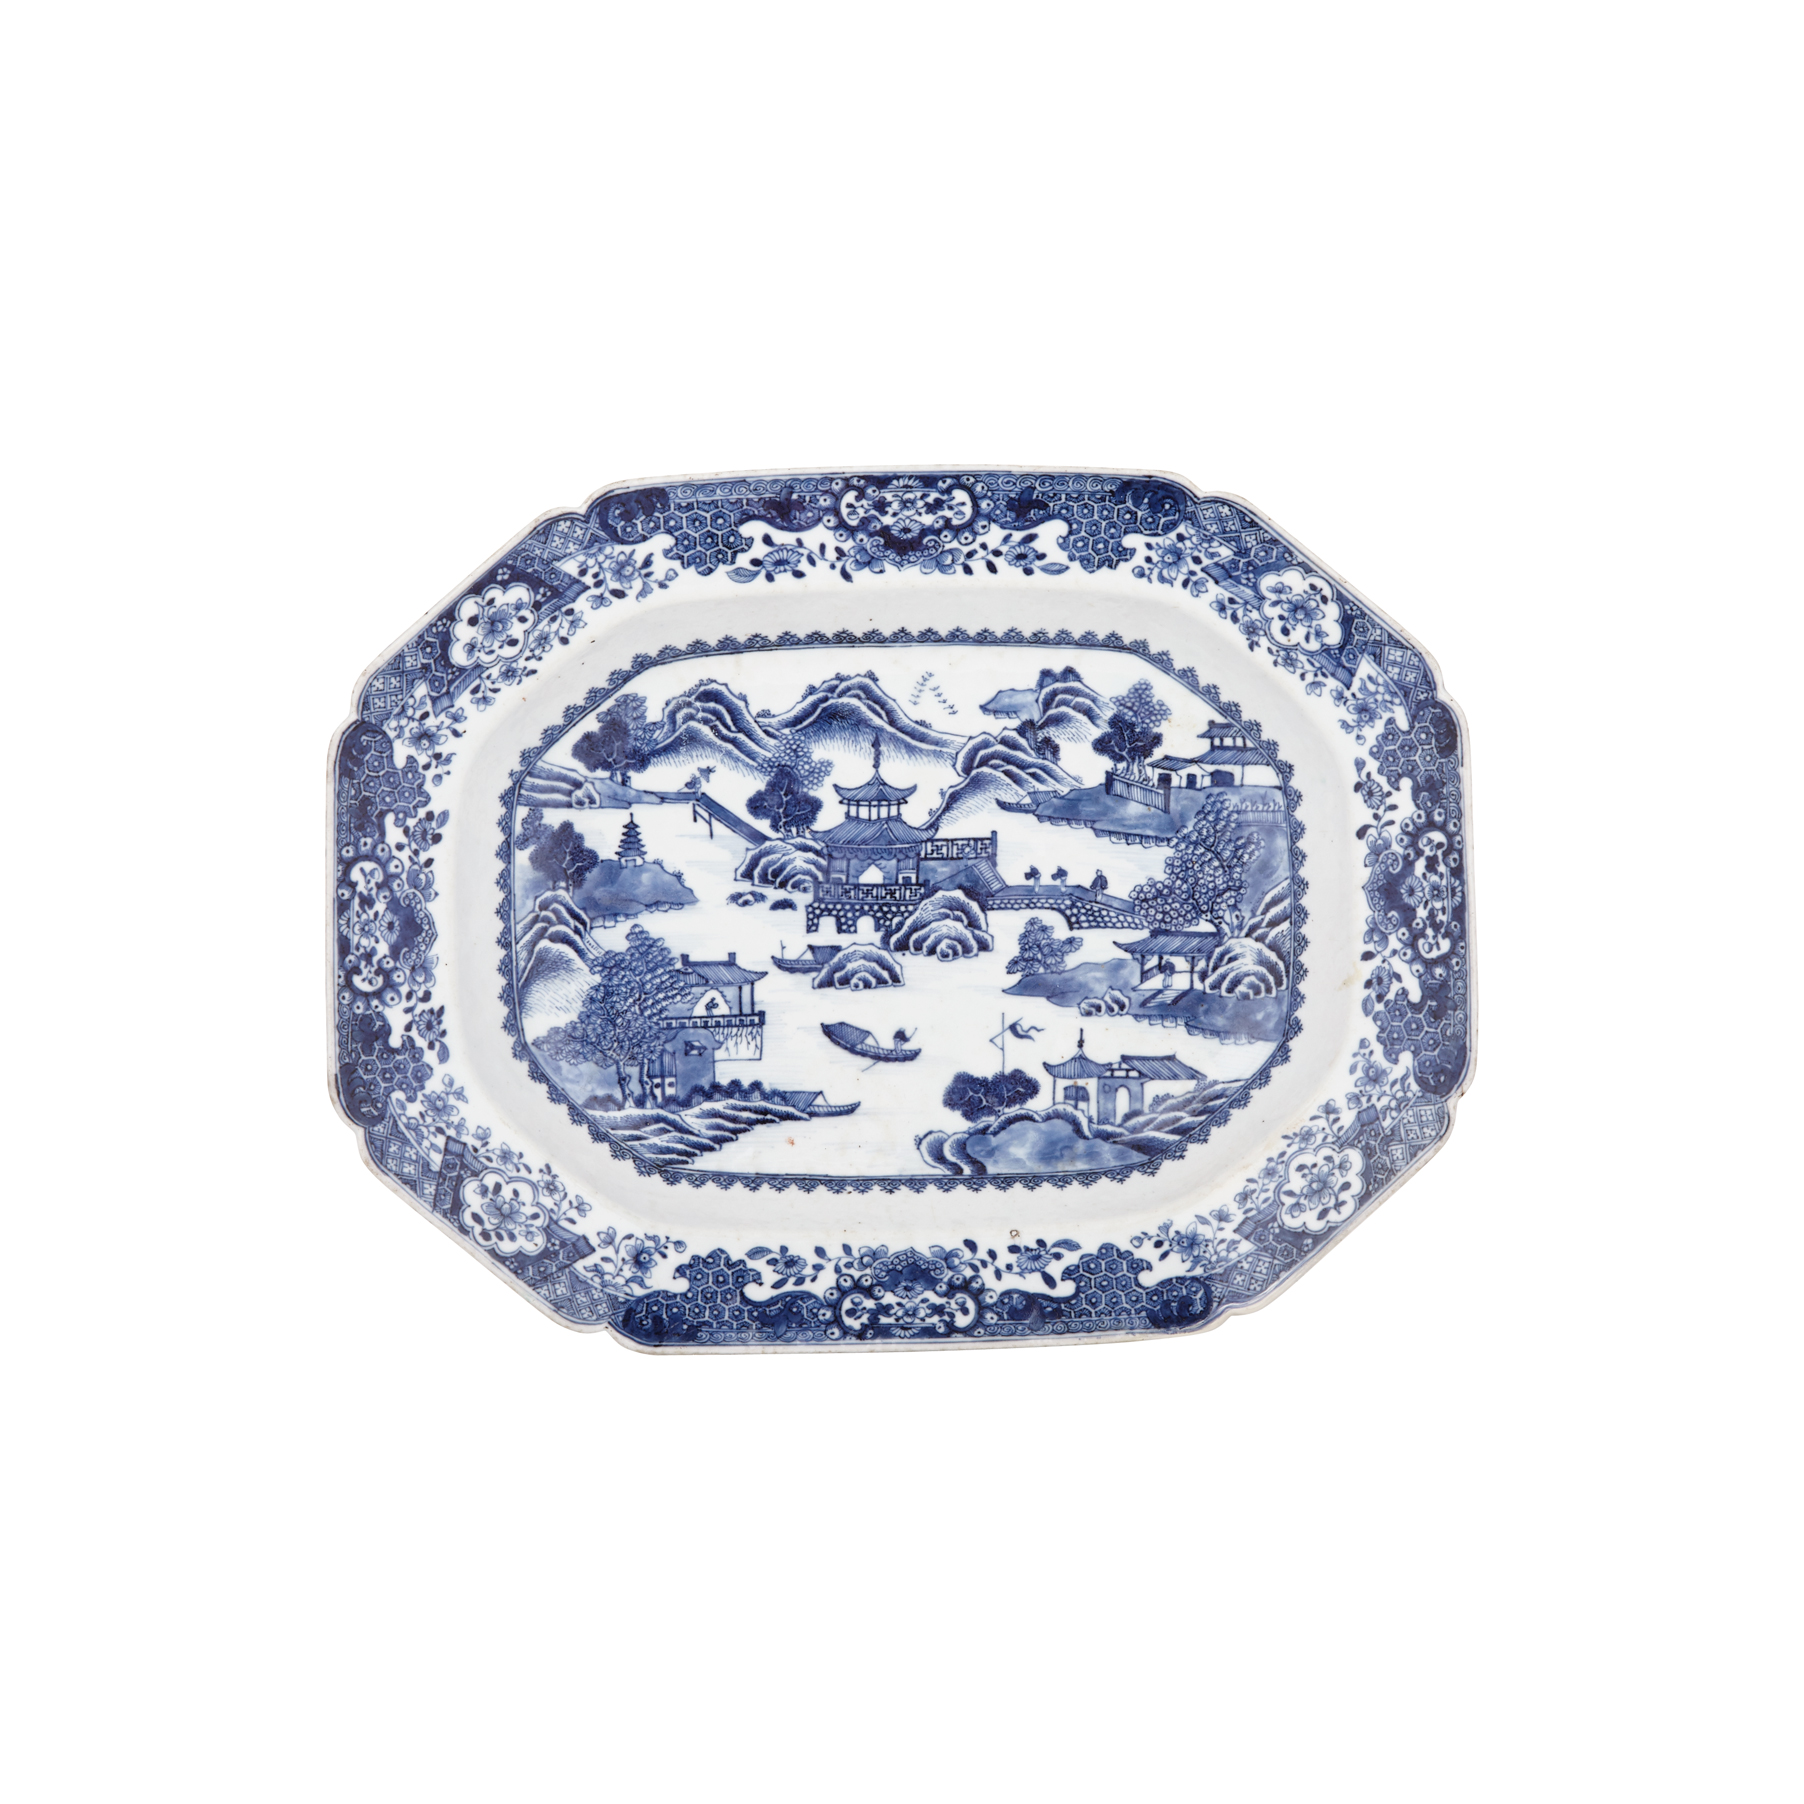 Fine Export Blue and White Platter, Qianlong Period (1736-1795)